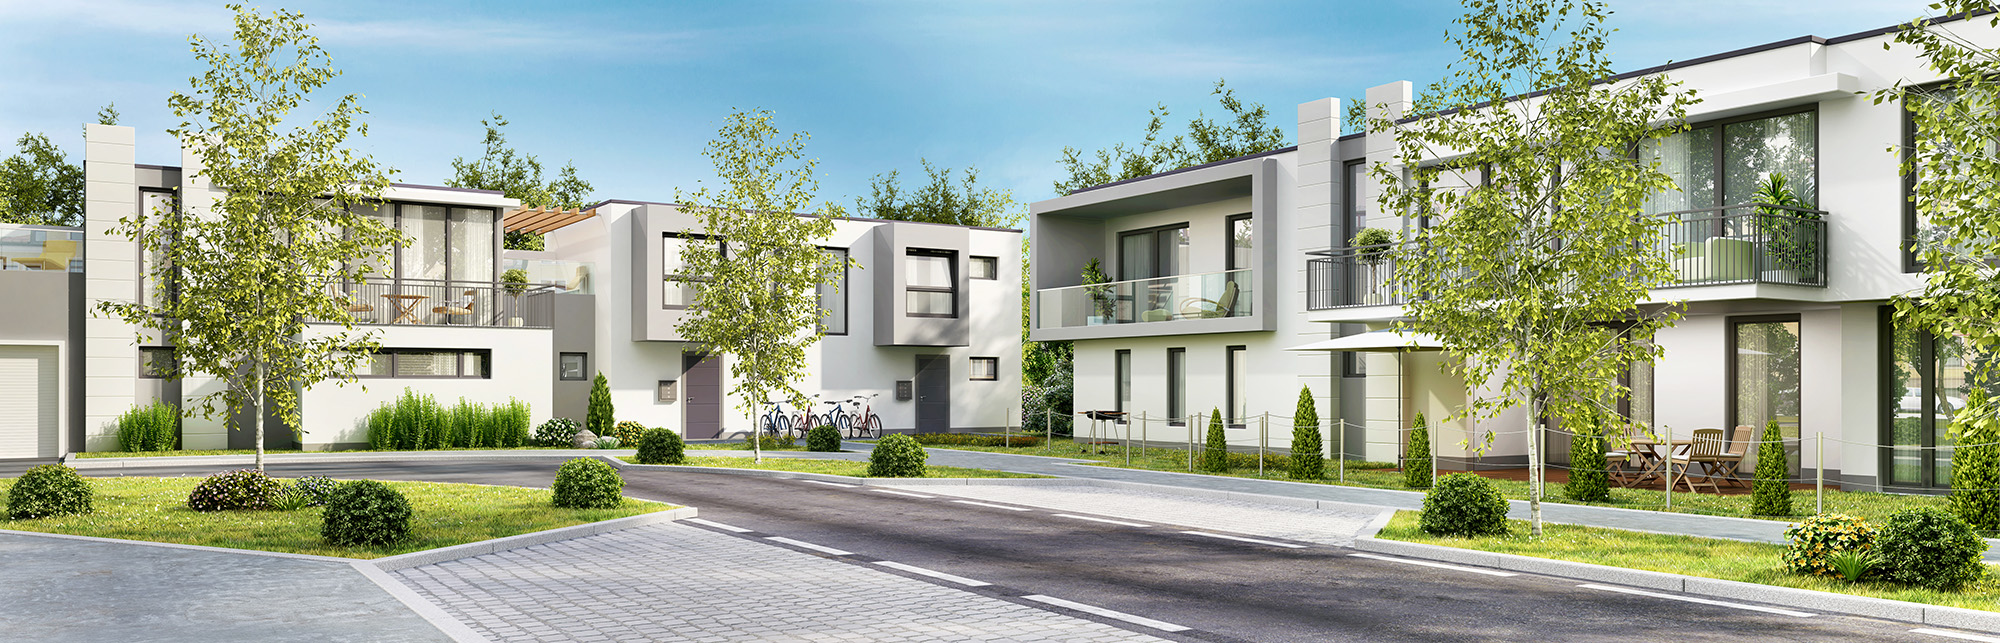 Kermi block of flats – outstanding quality and contemporary functions.